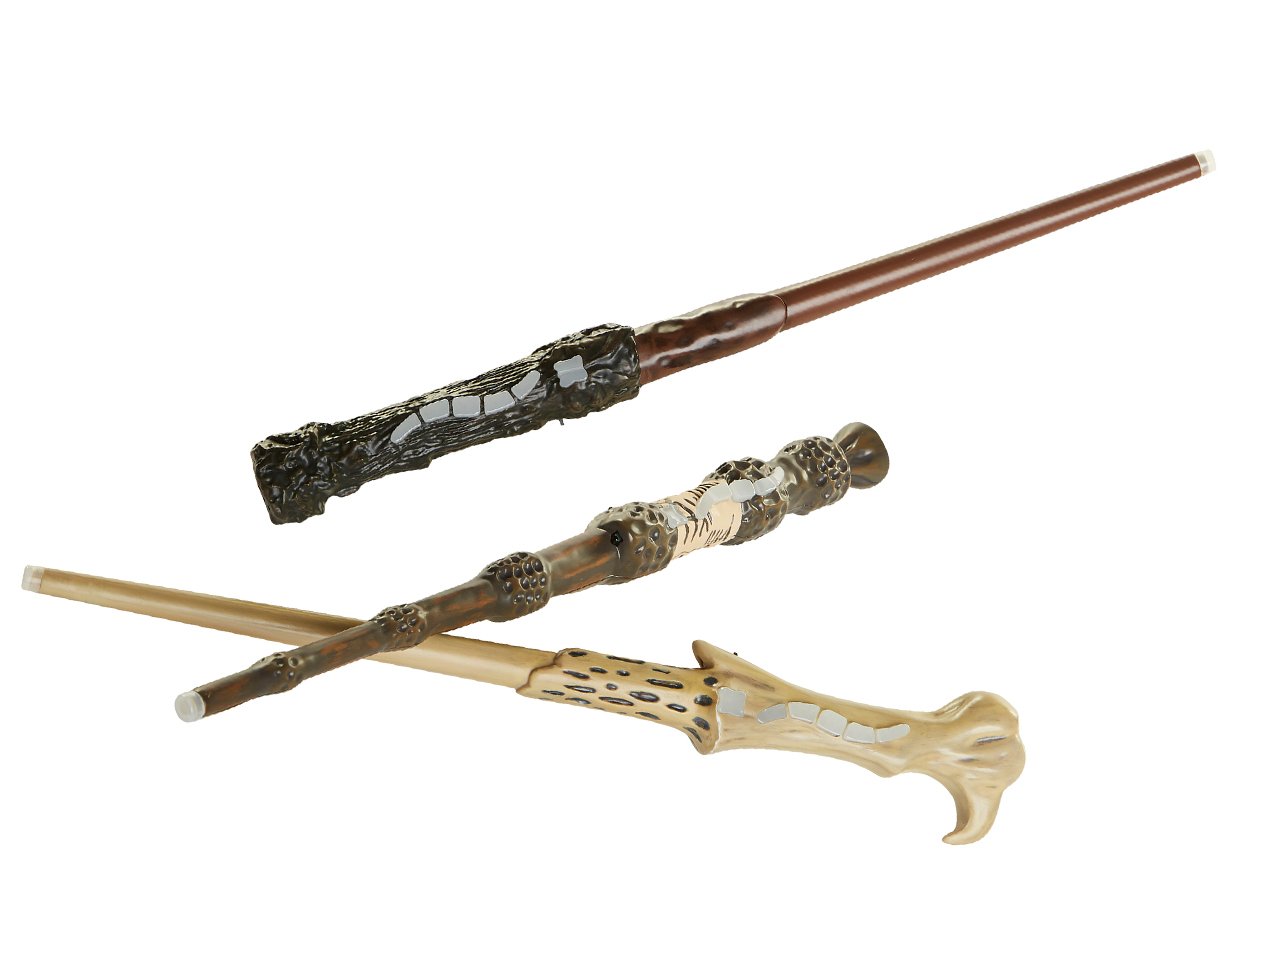 These new Harry Potter wands are beyond magical